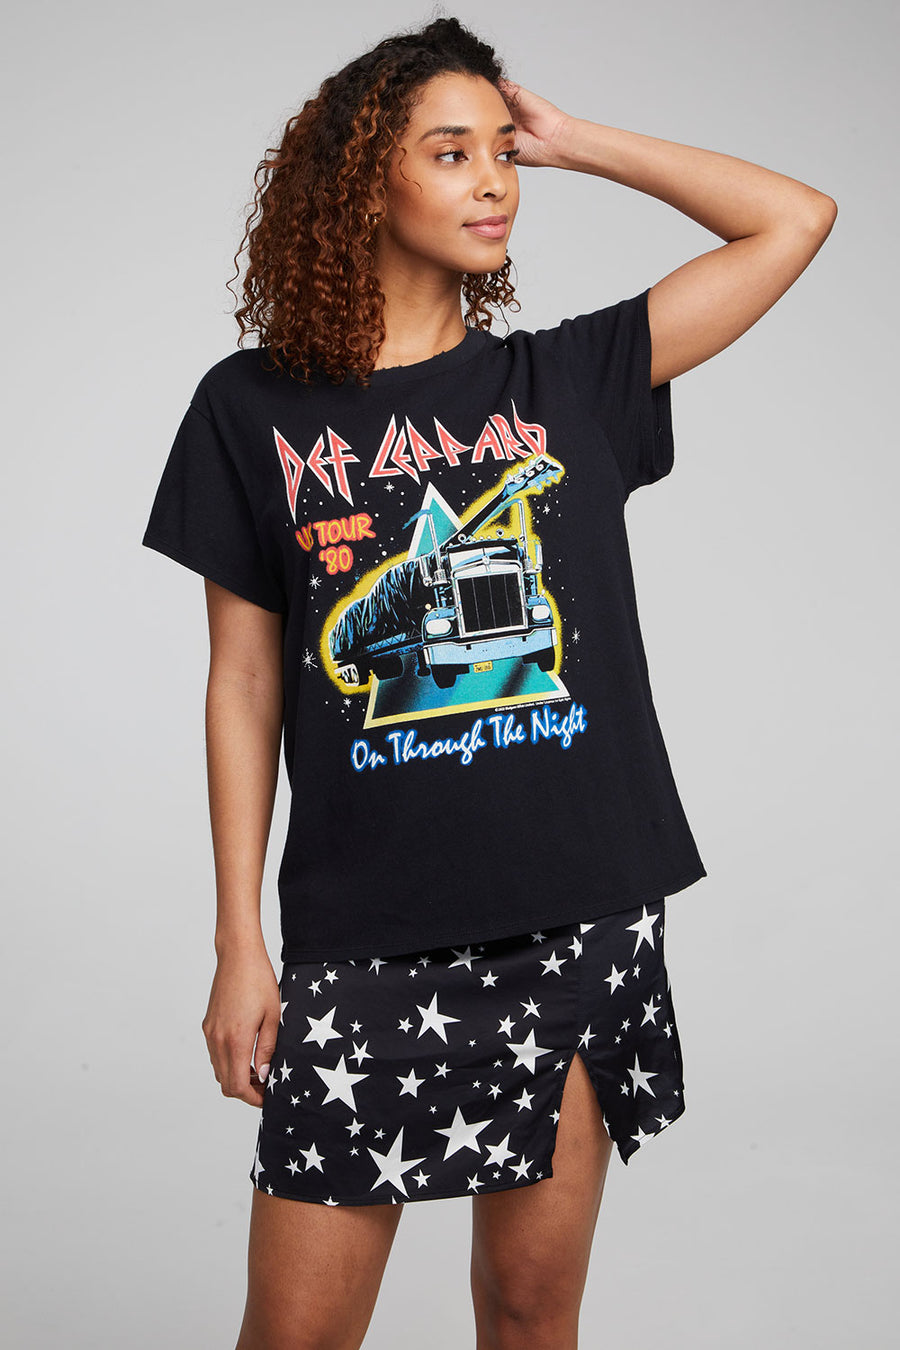 Def Leppard On Through The Night Tee WOMENS chaserbrand